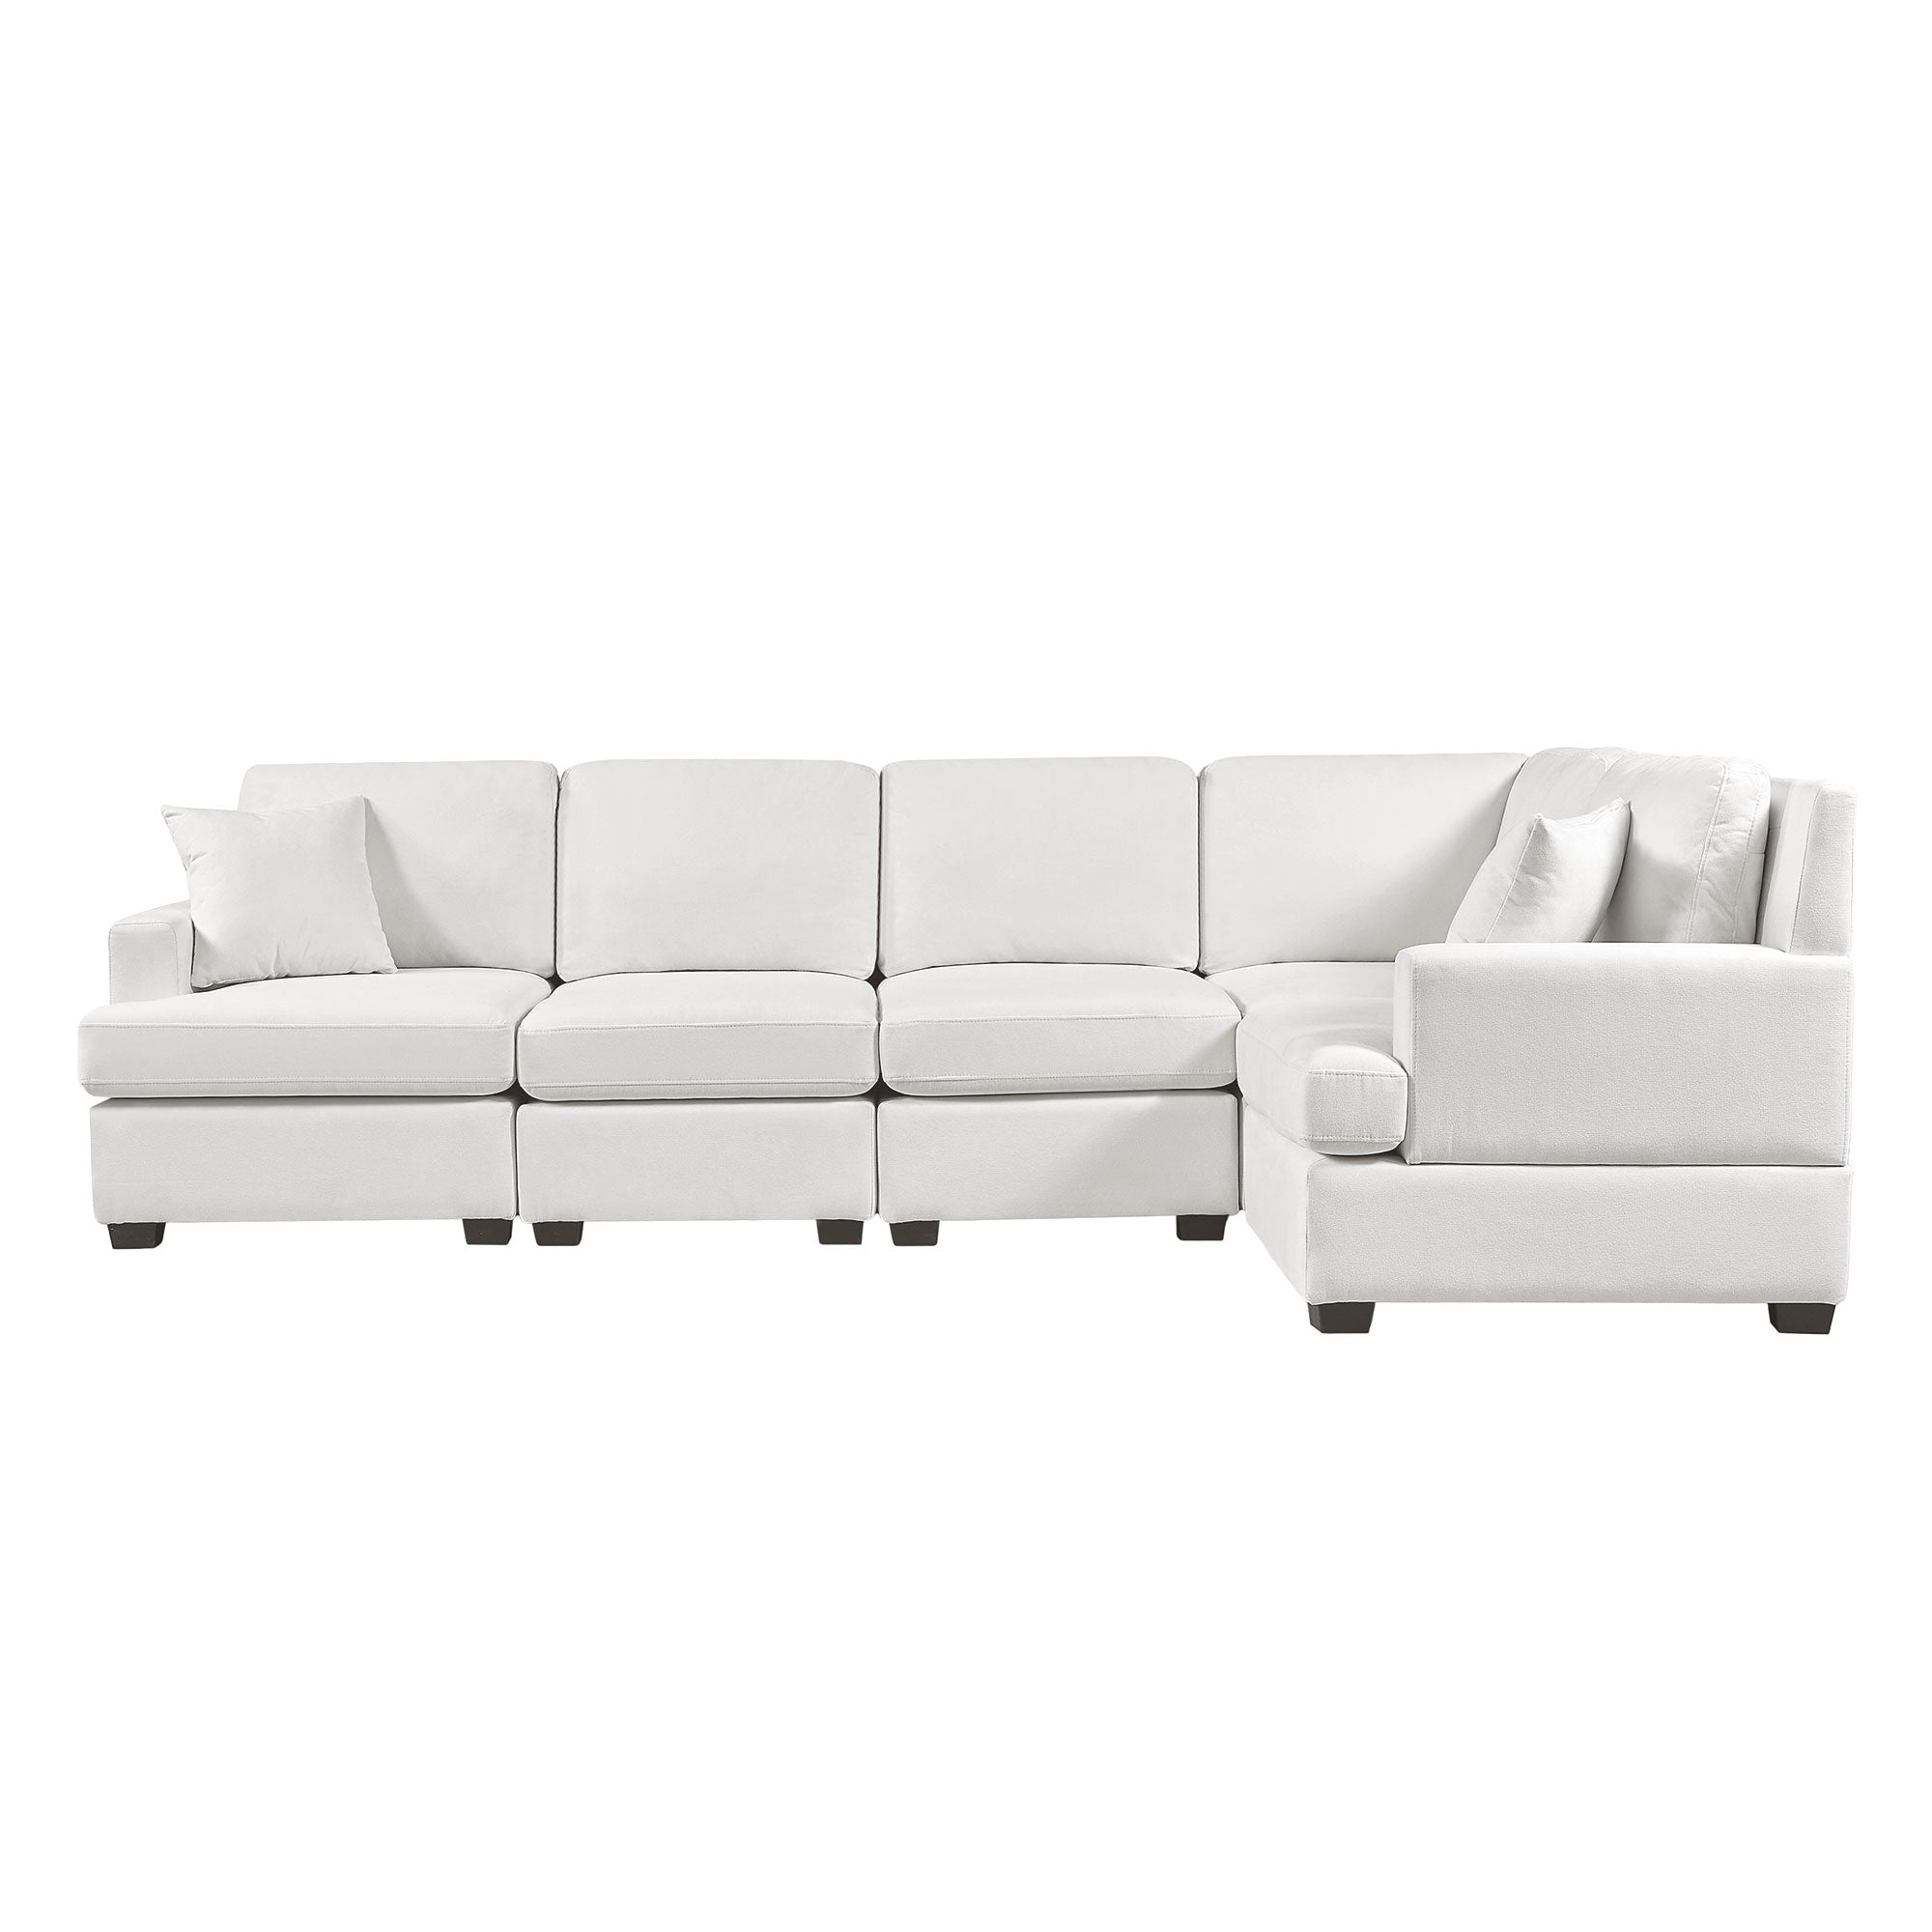 Bellemave 87.8" Sectional Modular Sofa with 2 Tossing cushions and Solid Frame